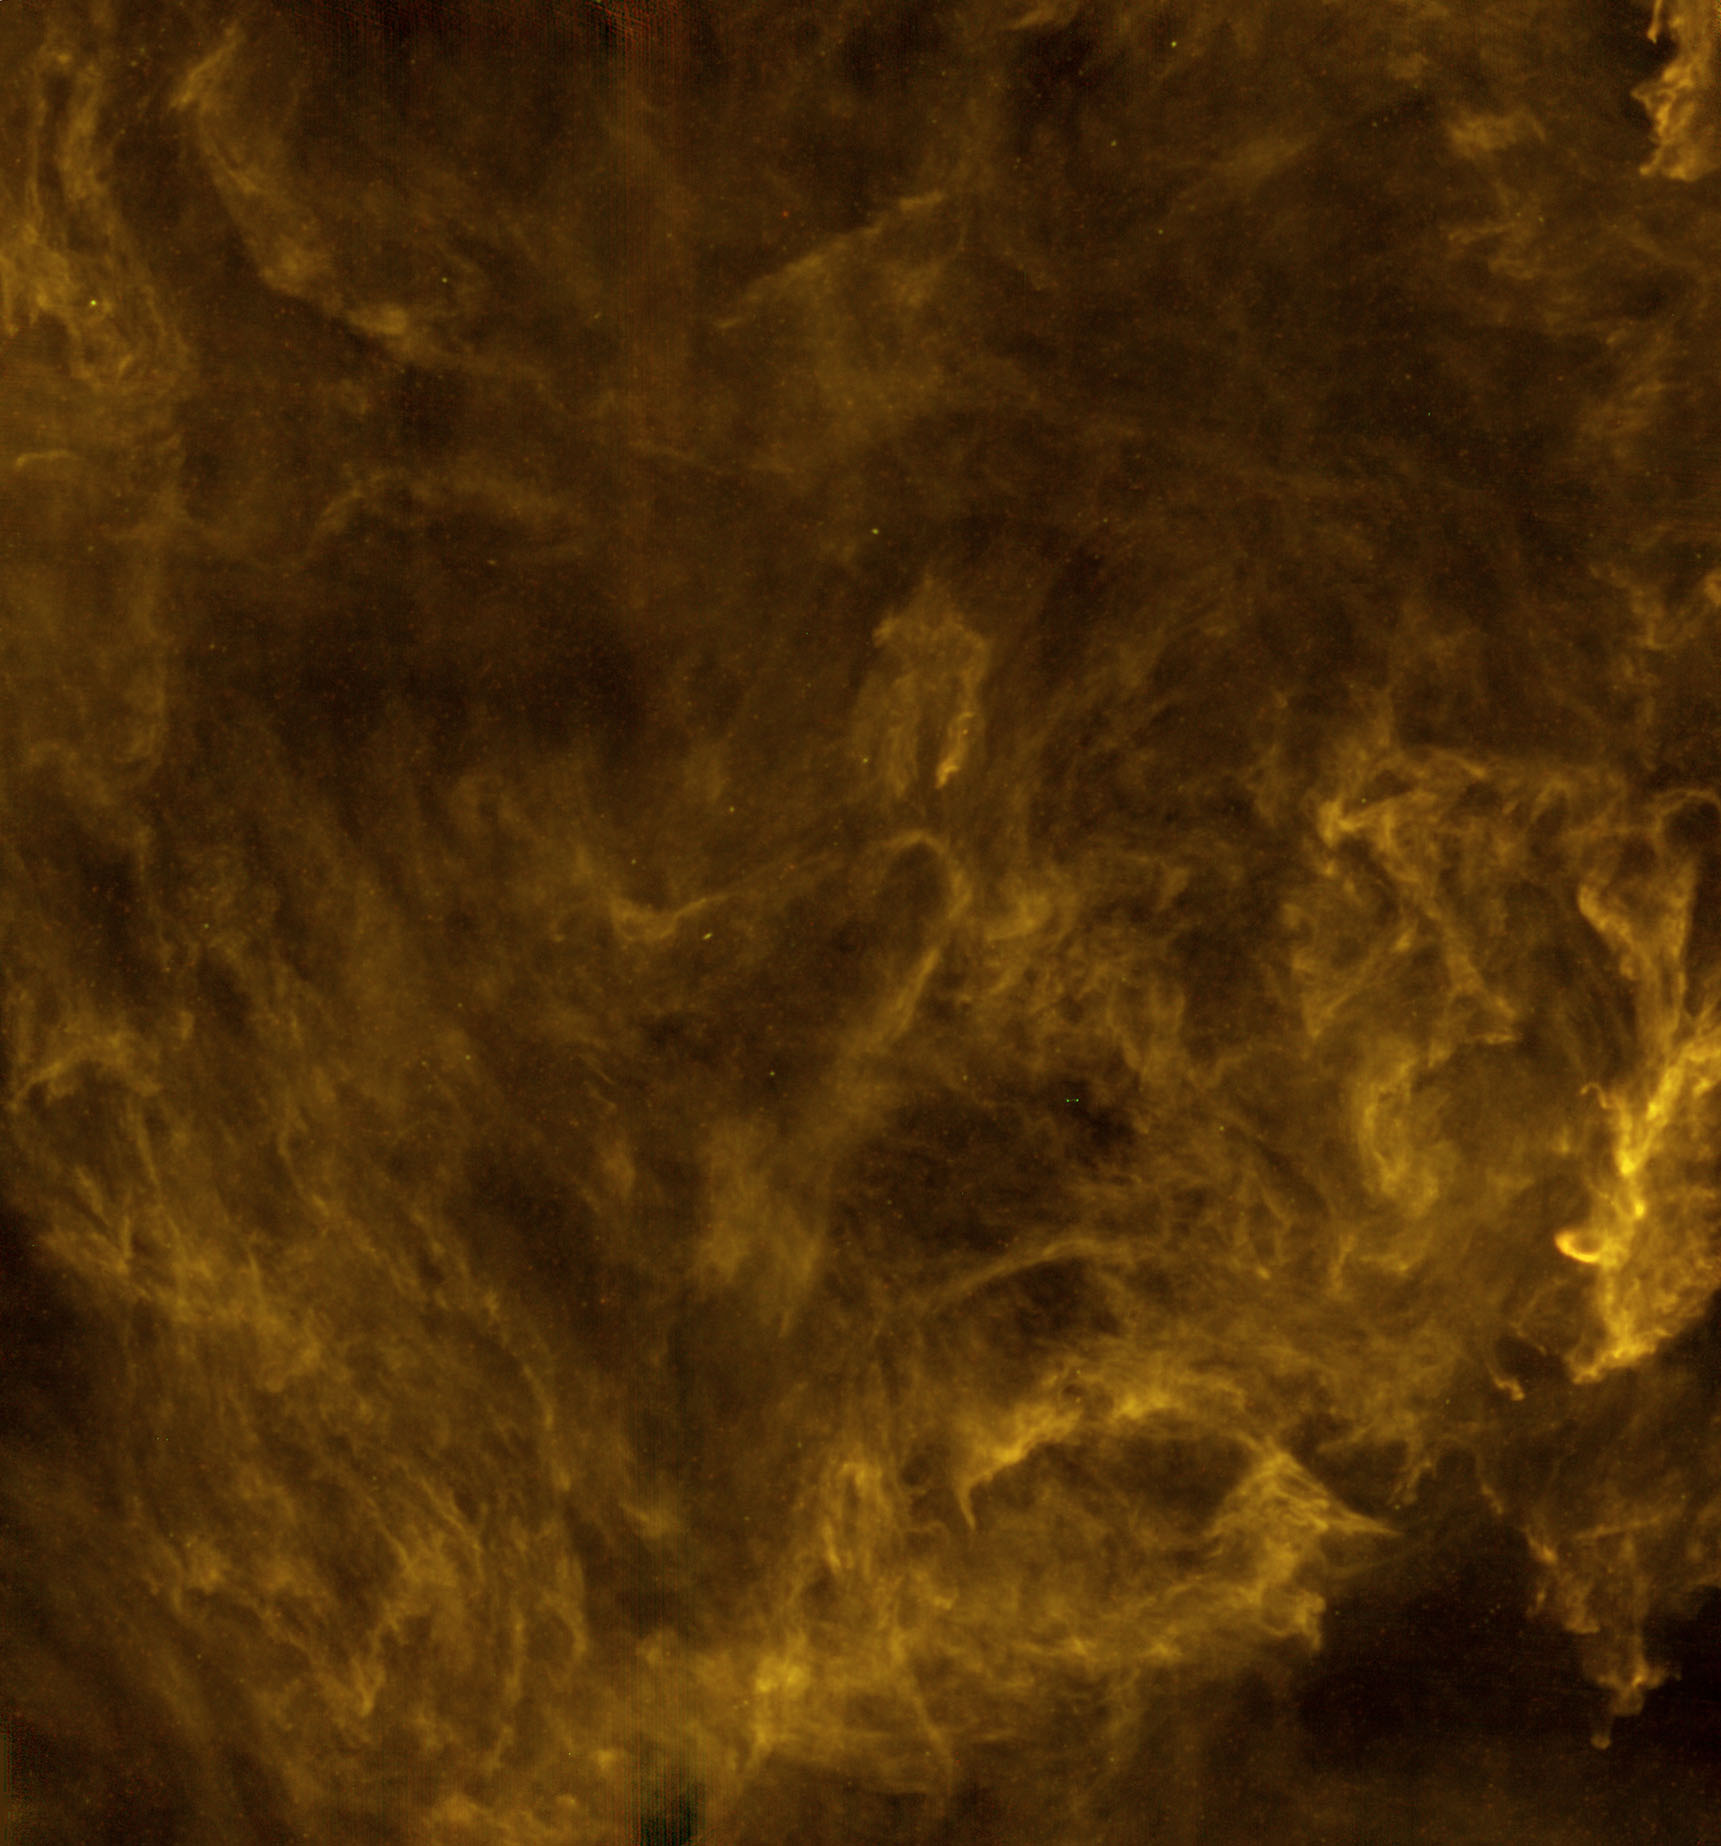 The Polaris Flare. Credit: ESA/Herschel/SPIRE/Ph. André CEA Saclay) for the 'Gould Belt survey' Key Programme Consortium and A. Abergel (IAS Orsay) for the 'Evolution of Interstellar Dust' Key Programme Consortium 